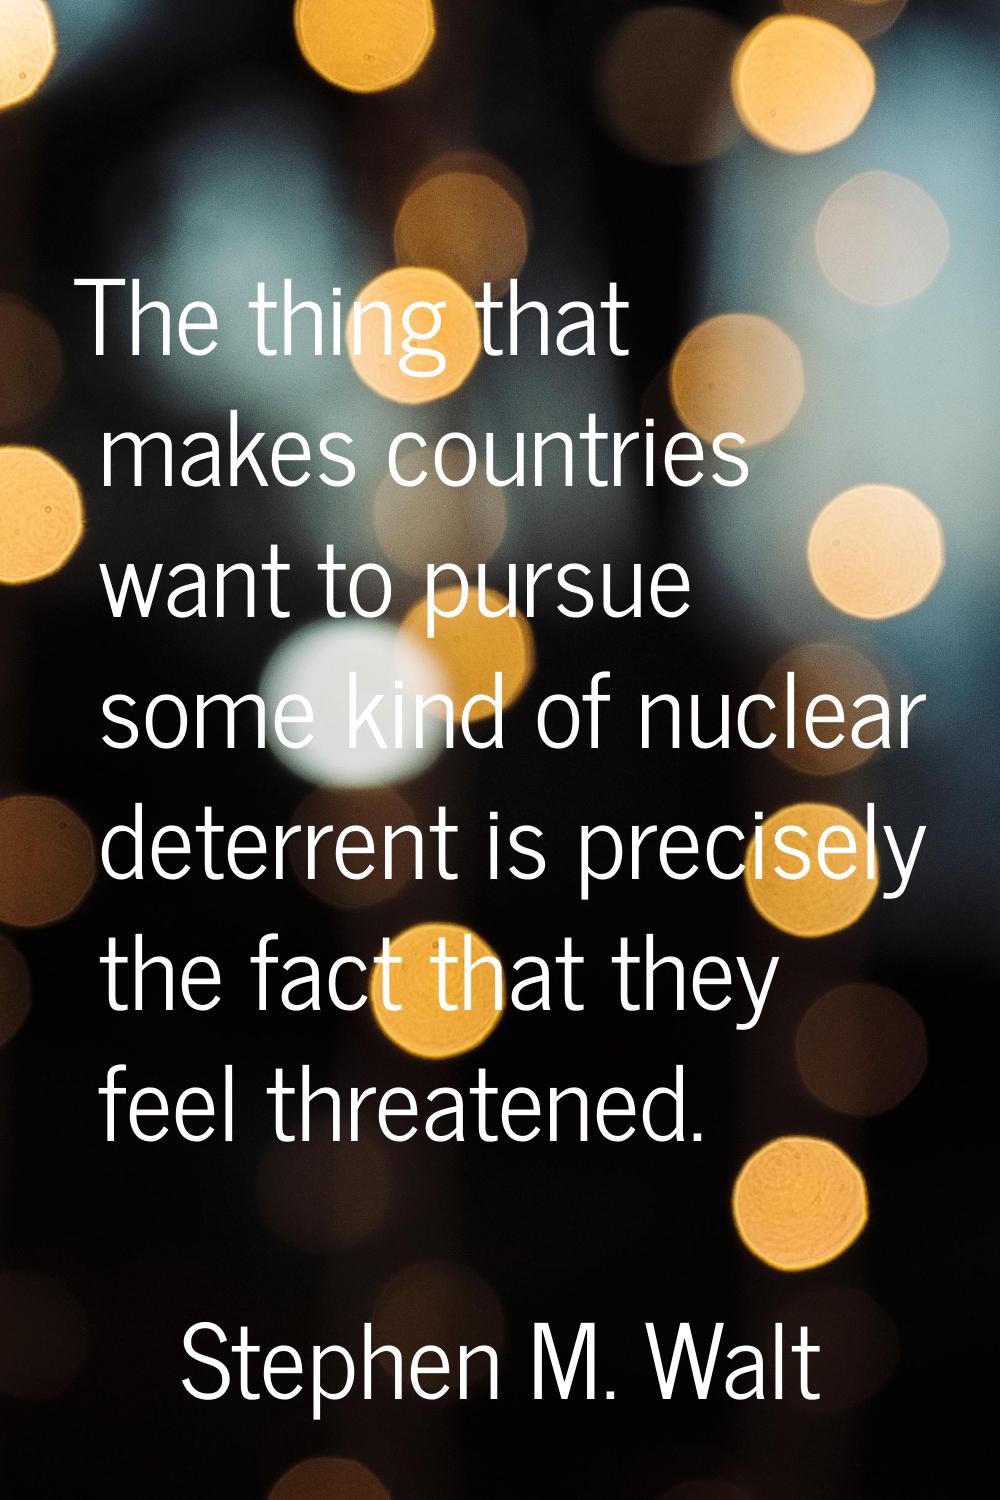 The thing that makes countries want to pursue some kind of nuclear deterrent is precisely the fact 